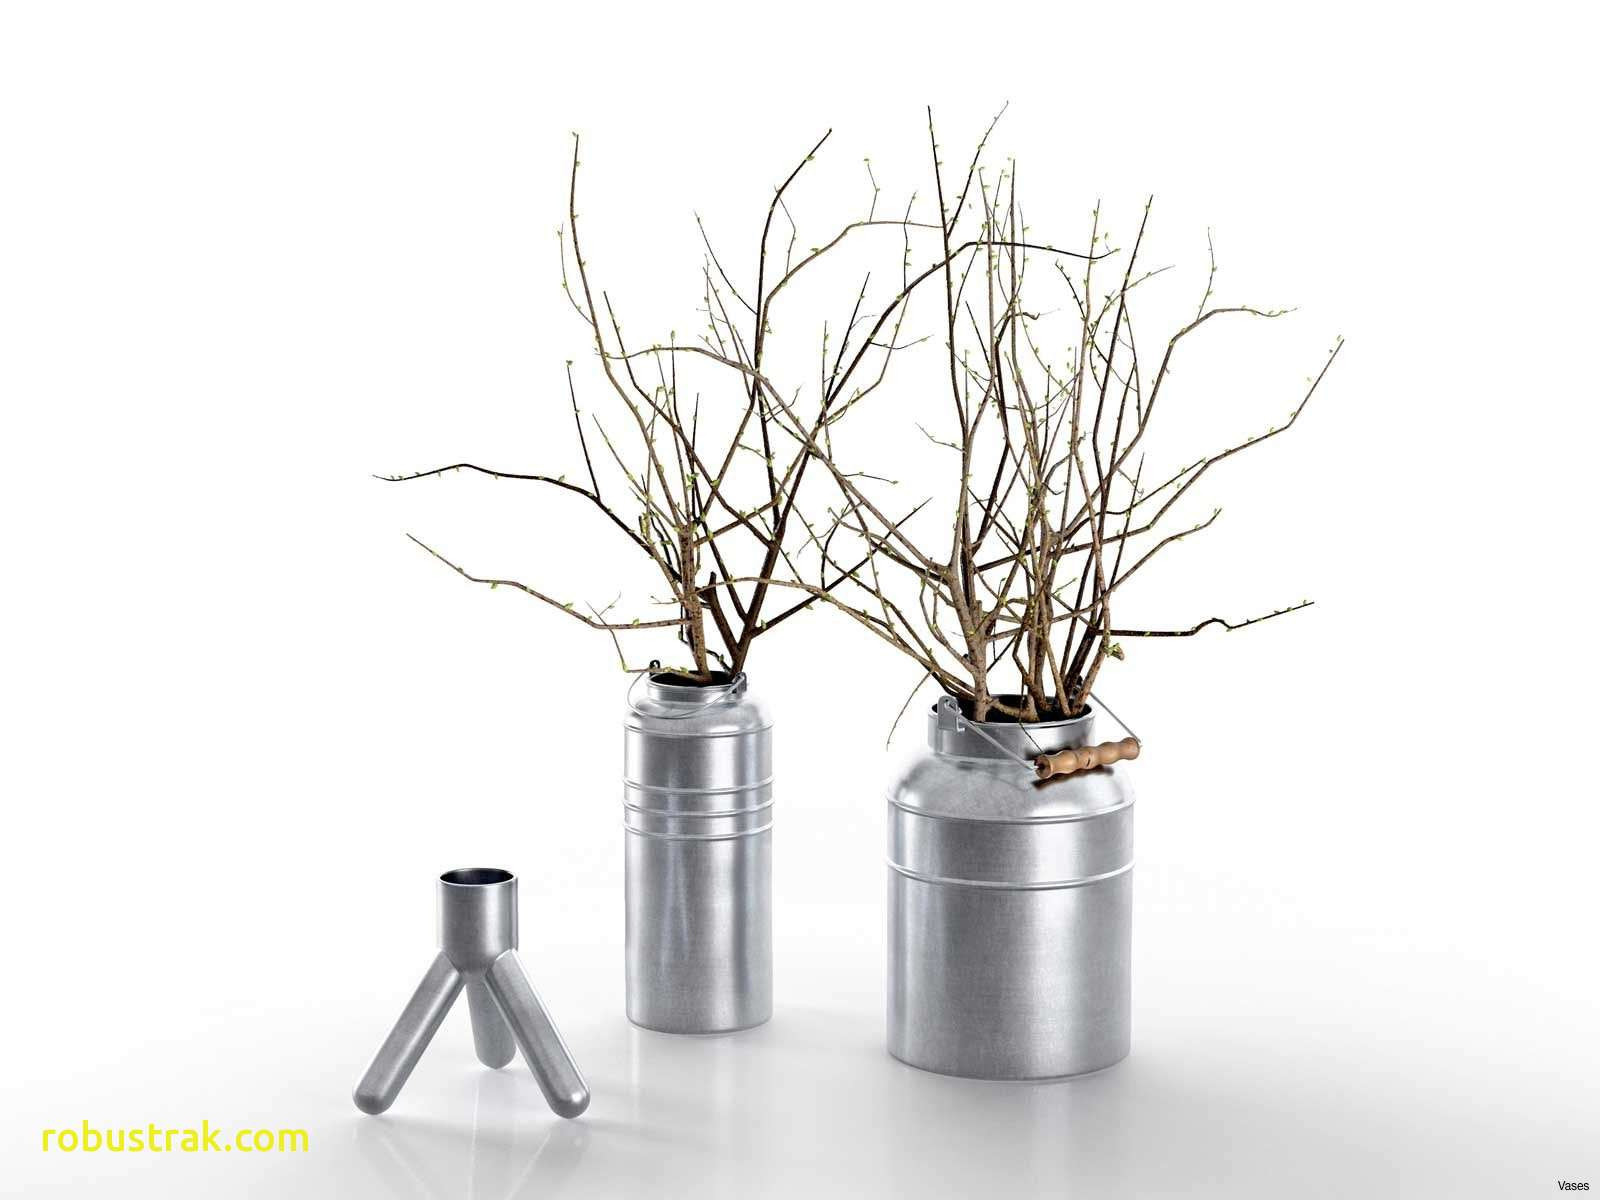 27 Lovable Long Branches for Vases 2024 free download long branches for vases of decorative sticks for vase best of grey and white wedding decor best intended for decorative sticks for vase inspirational new branches in vase as decoration of de